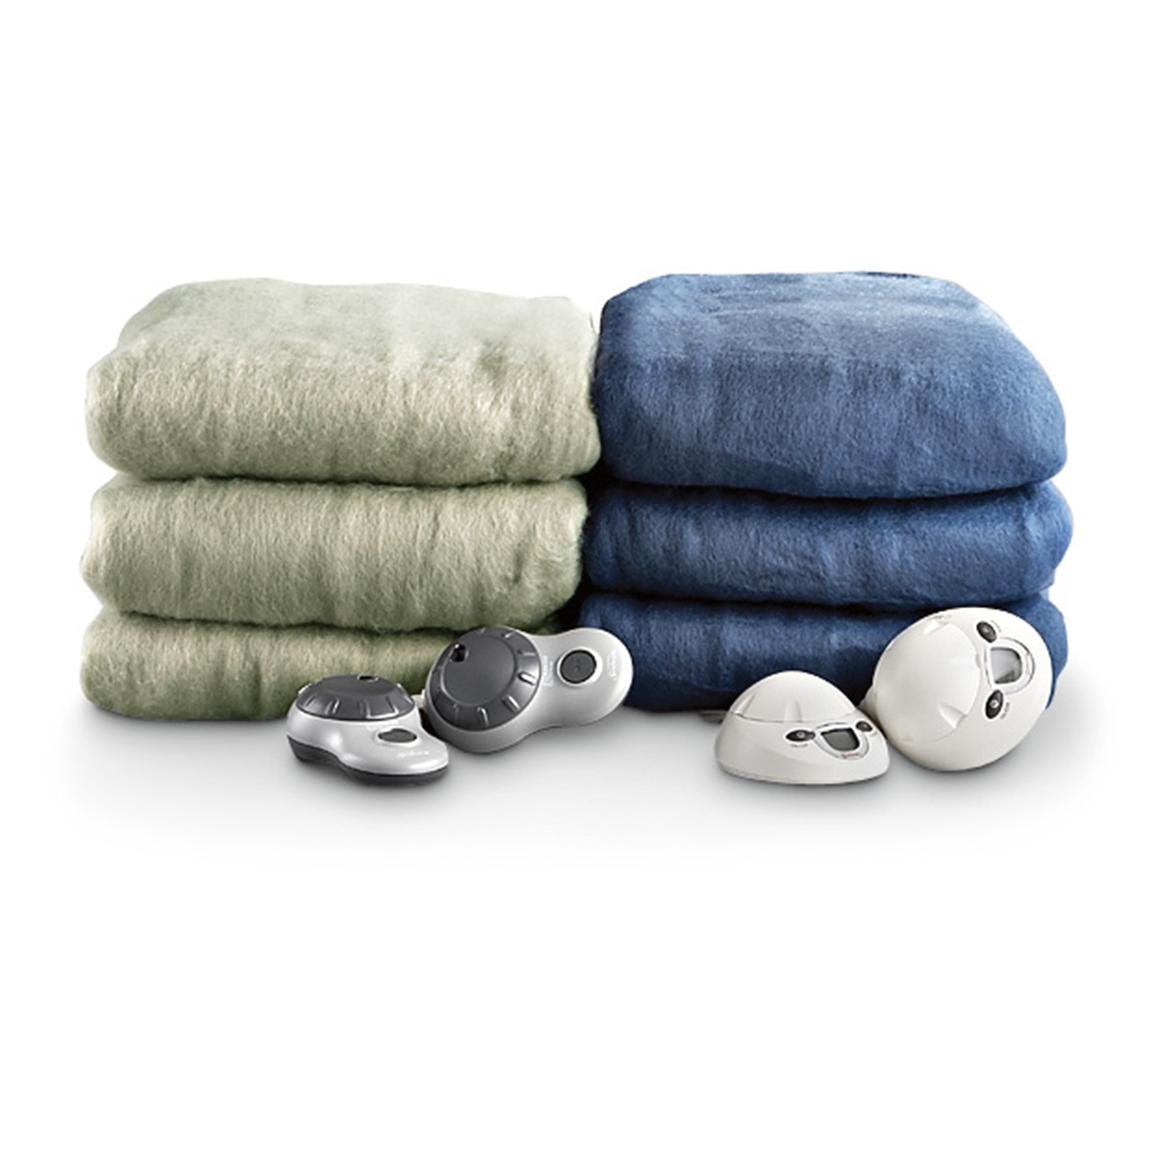 Sunbeam Electric Blanket 216314 Blankets Throws At Sportsman s Guide